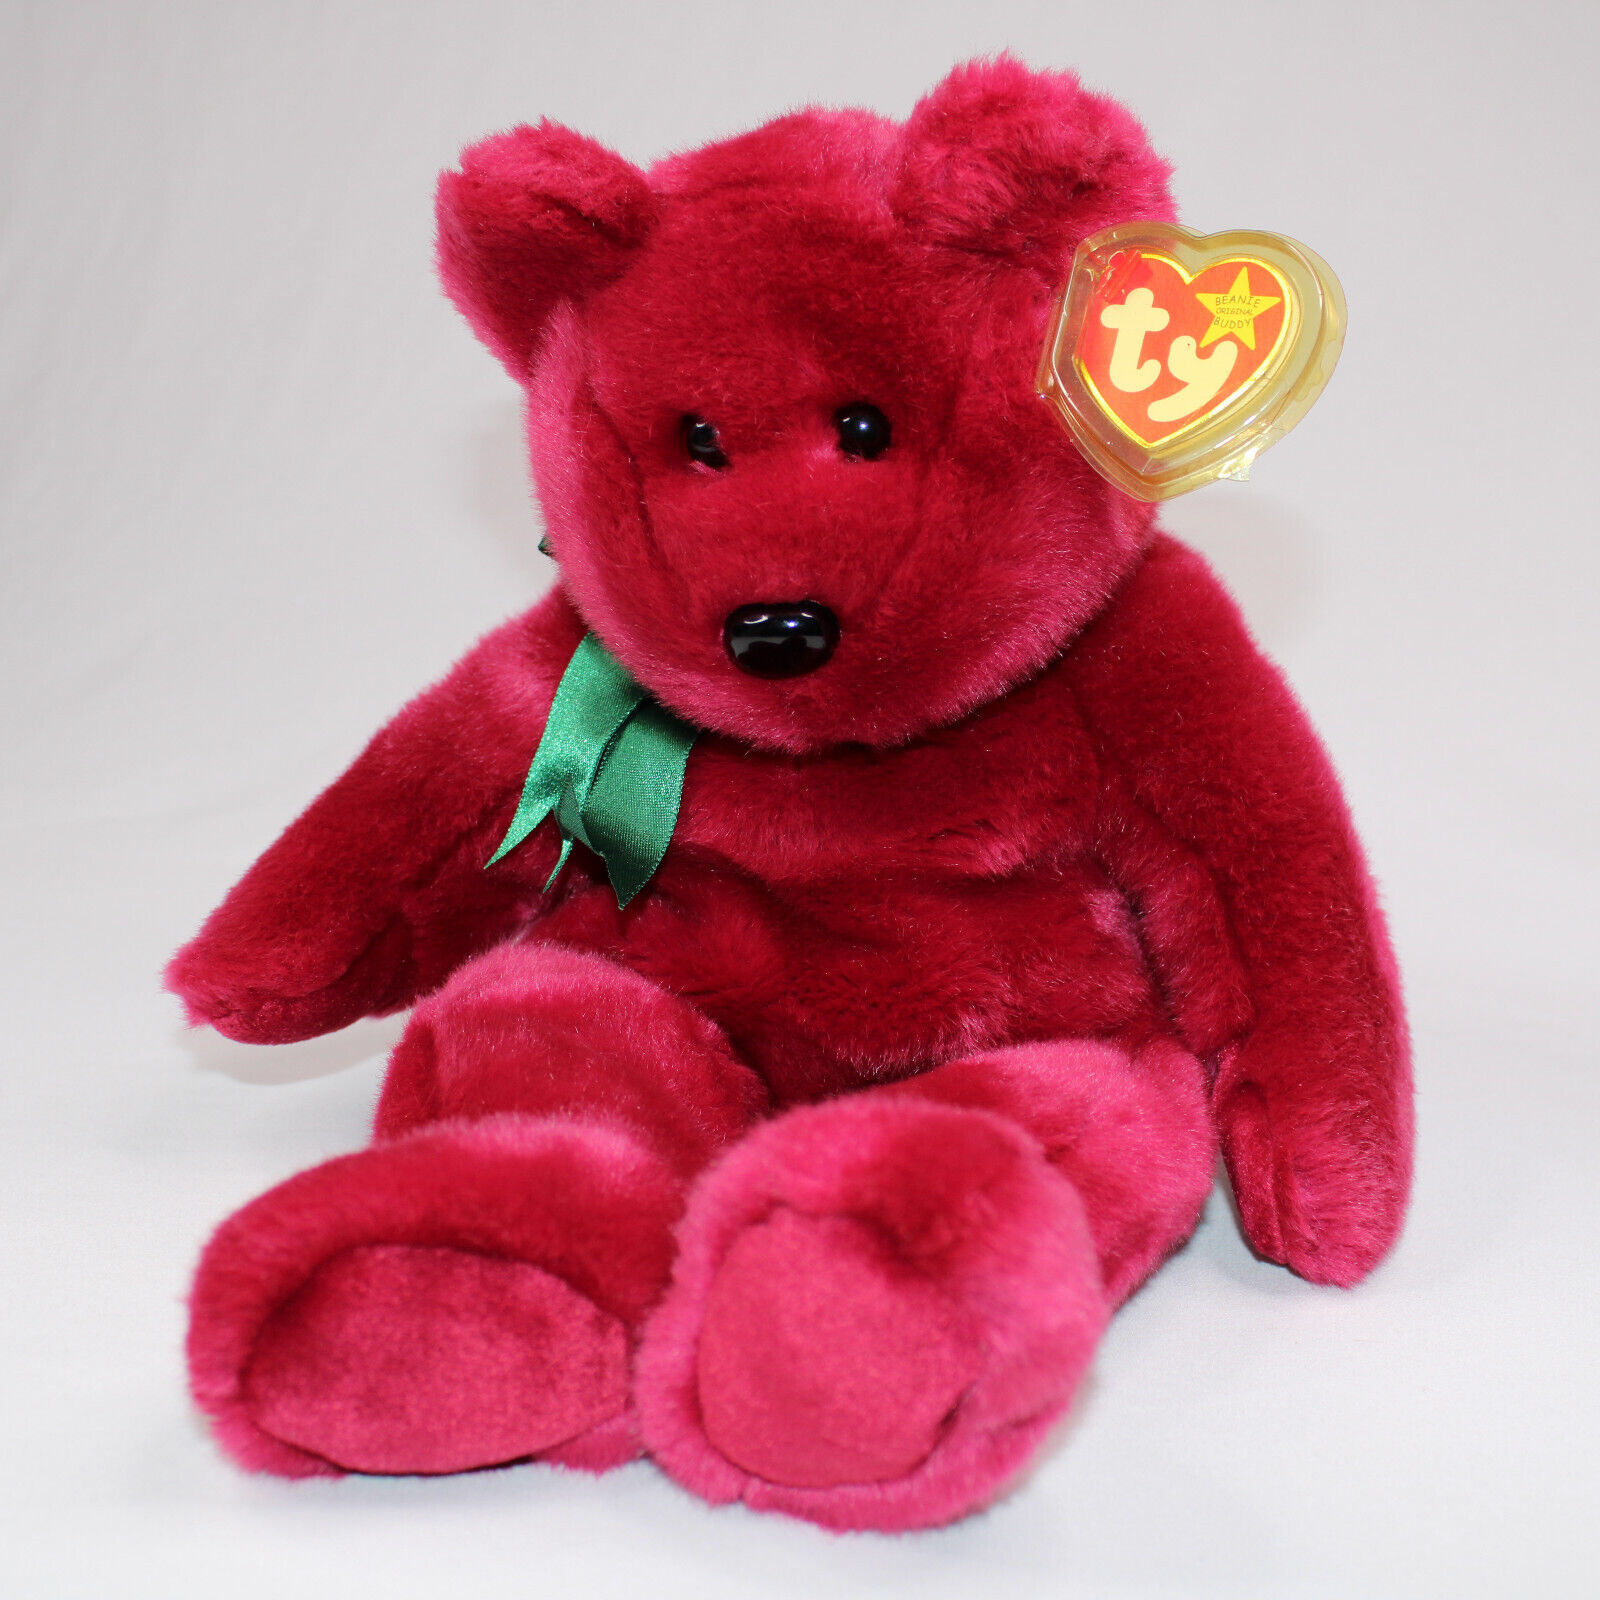 Ty Beanie Buddies Collection Teddy Cranberry Color Rare 14" Teddy Bear With Tags - $14.49